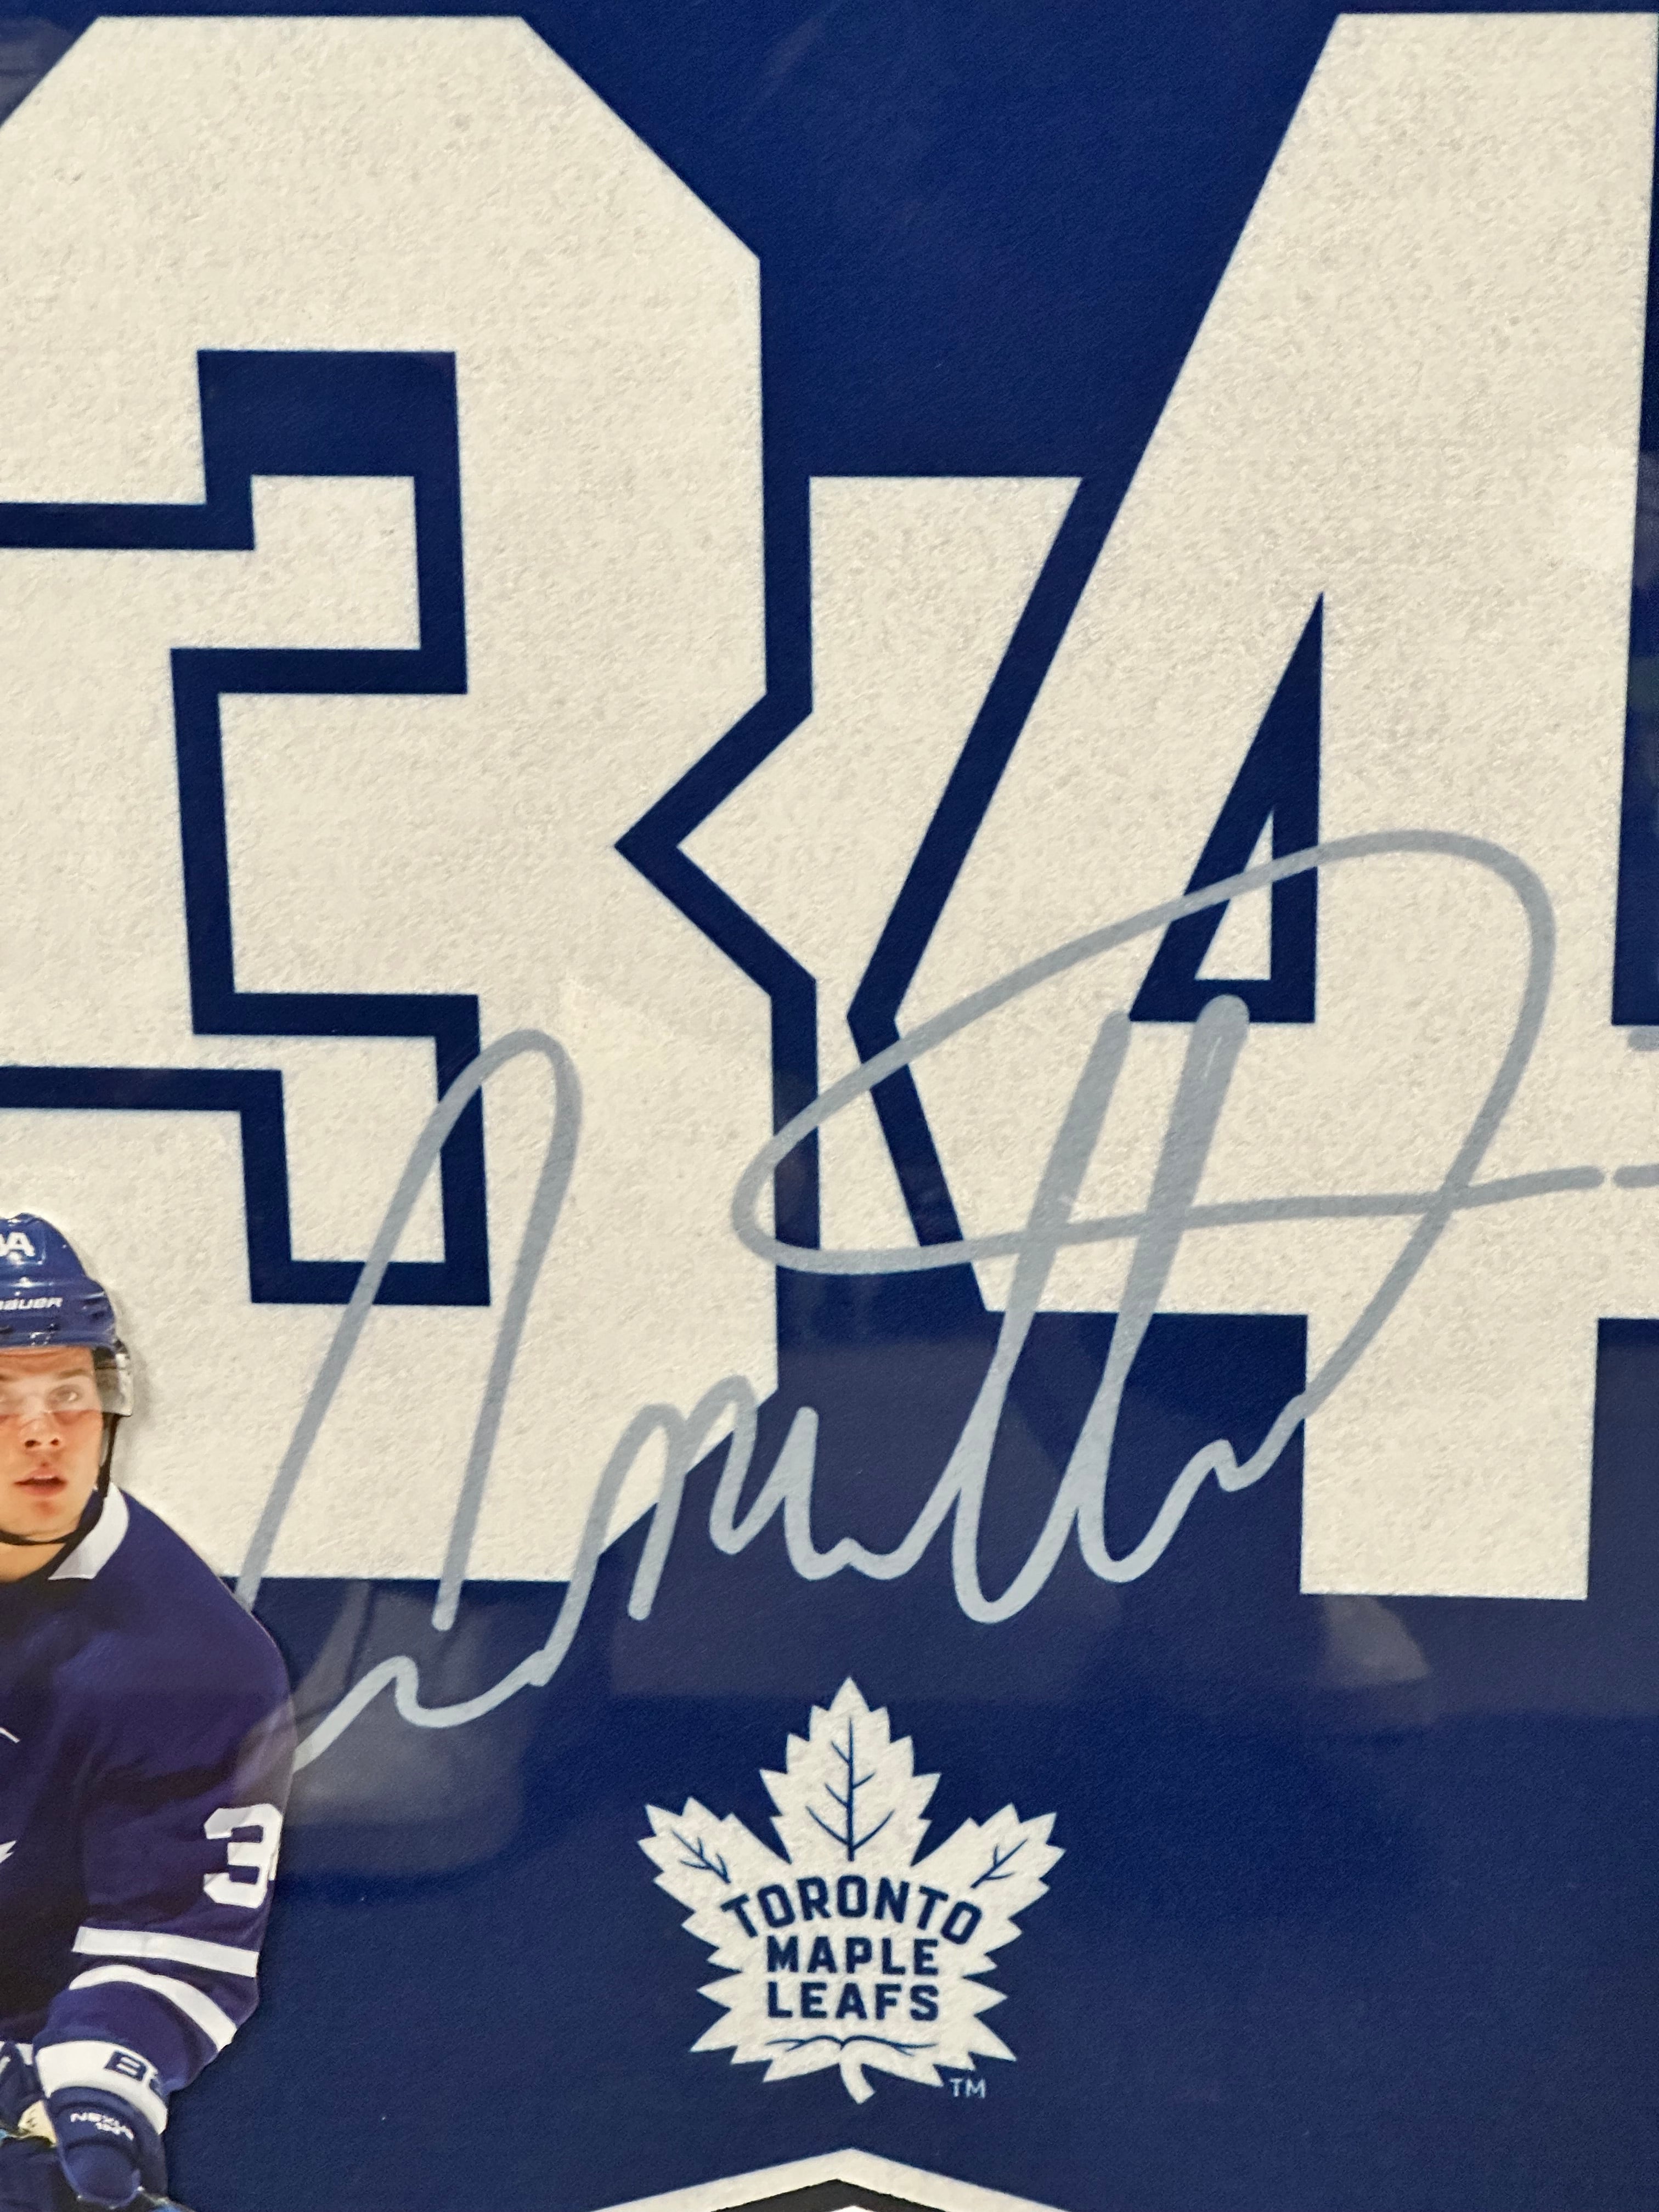 Auston Matthews autographed Toronto Maple Leafs hockey banner framed with COA from Daniel Parry